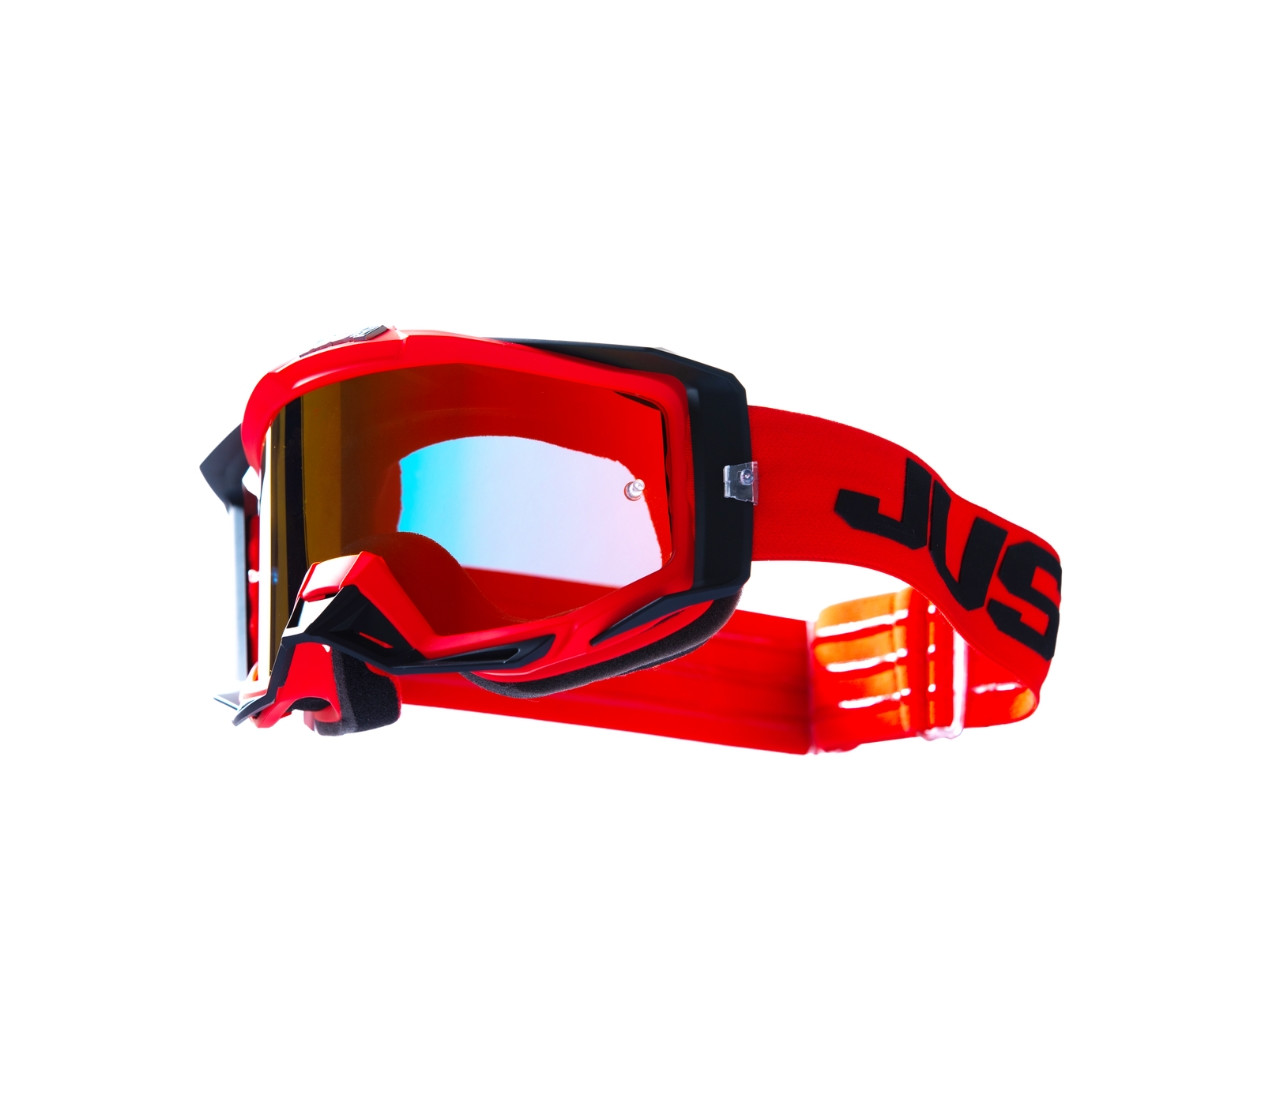 JUST1 GOGGLE IRIS 2.0 LOGO RED - BLACK MIRROR RED LENS